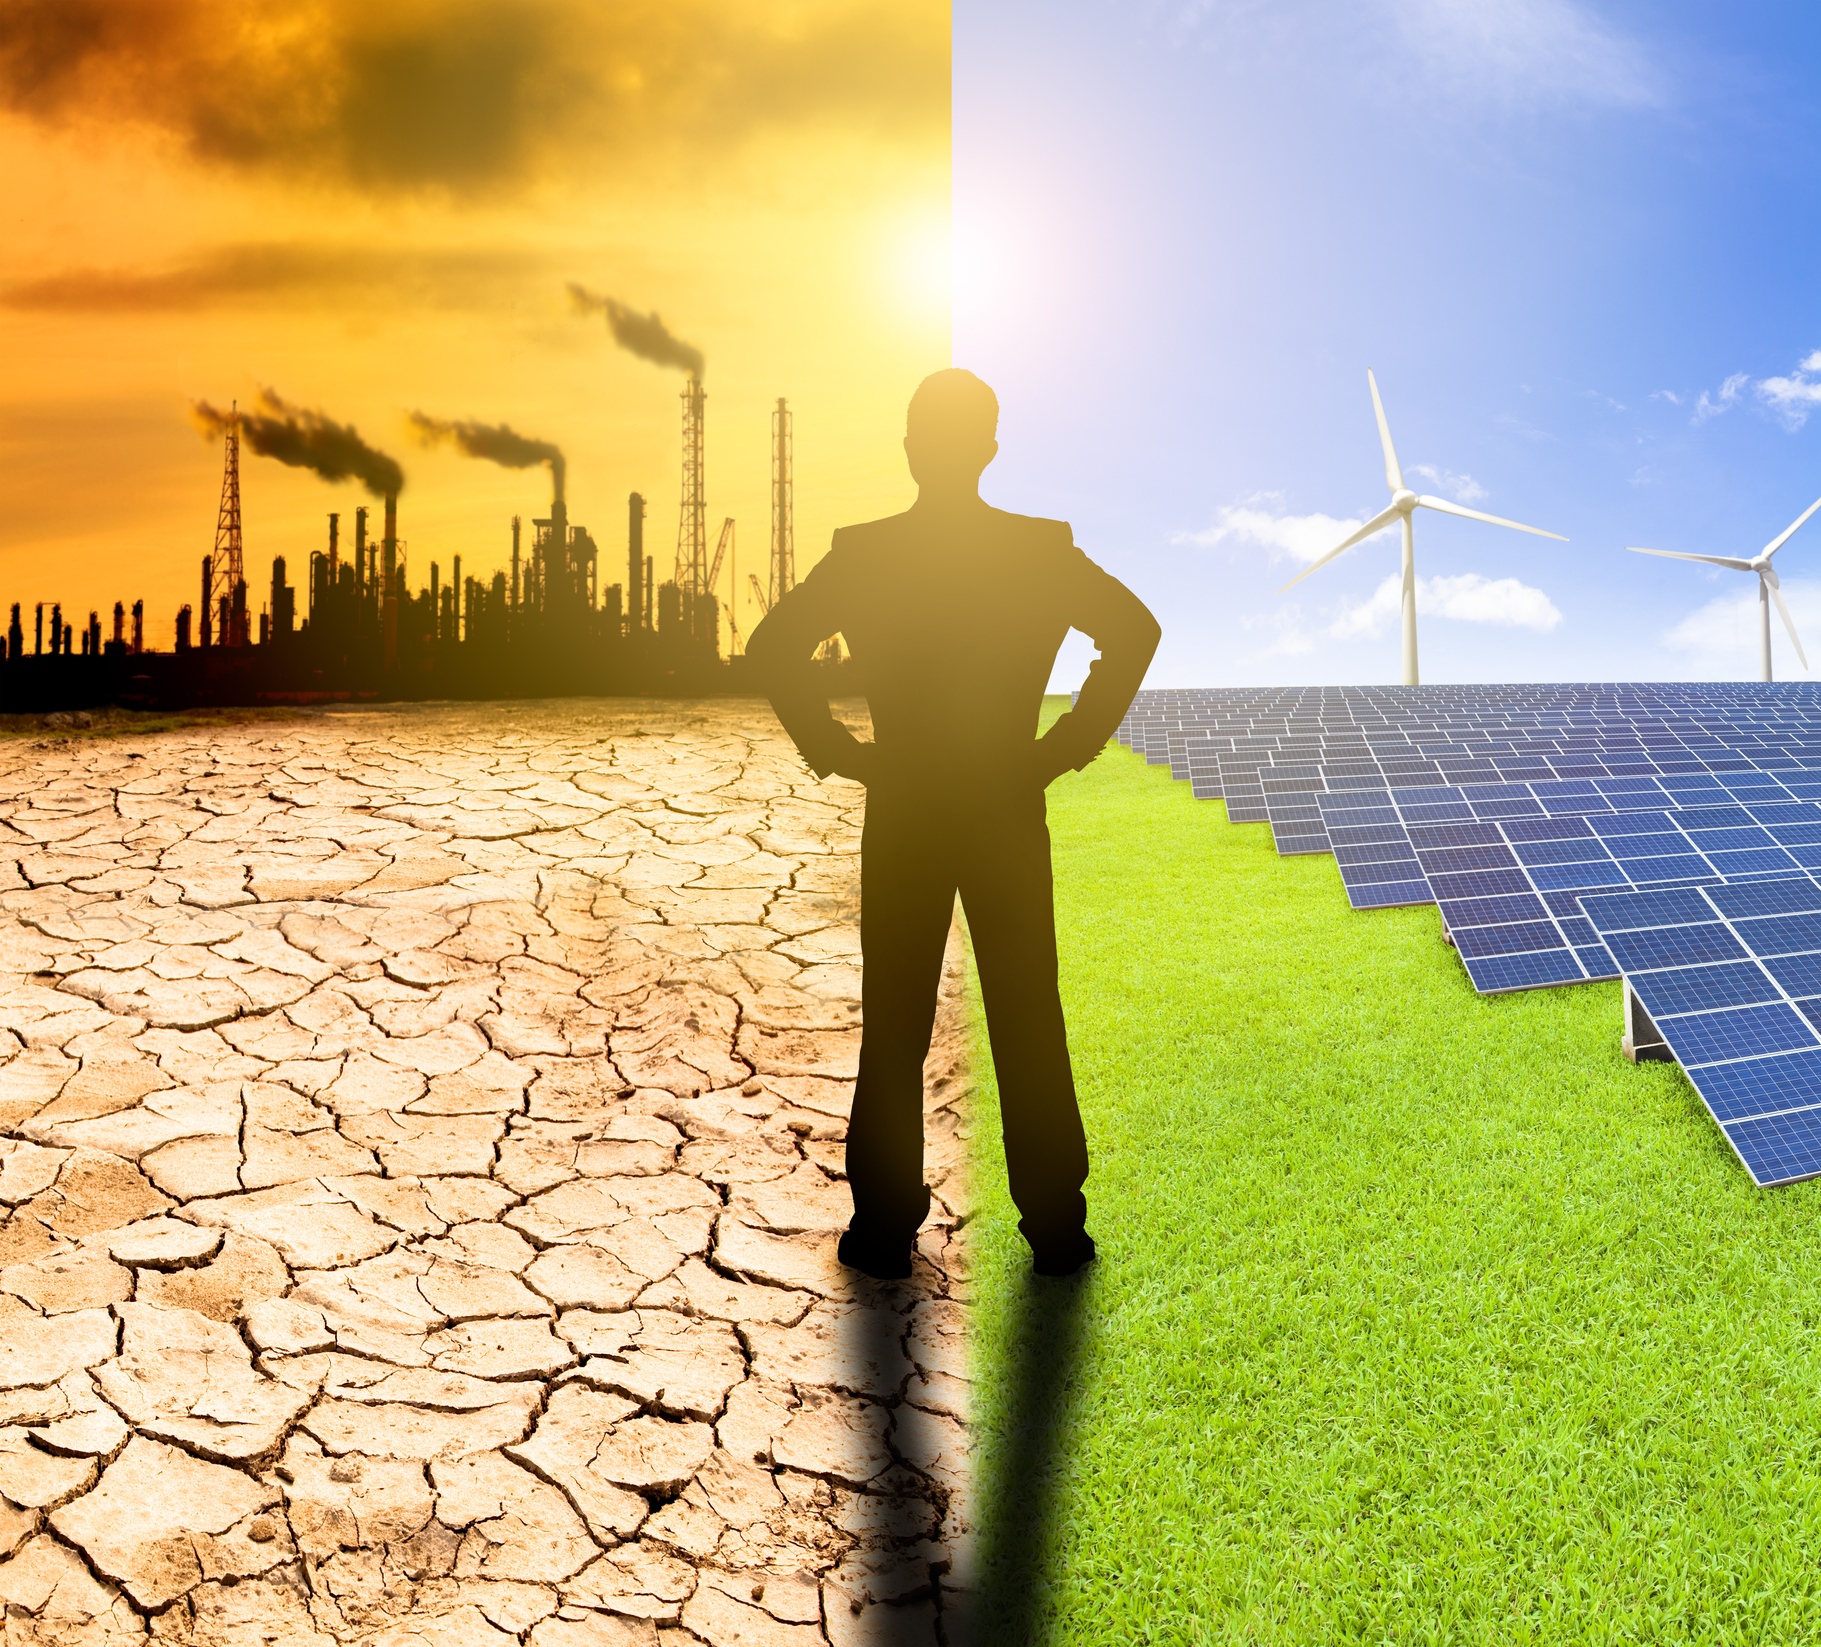 Man standing between a polluted desert and a green field with solar panels and wind turbines.